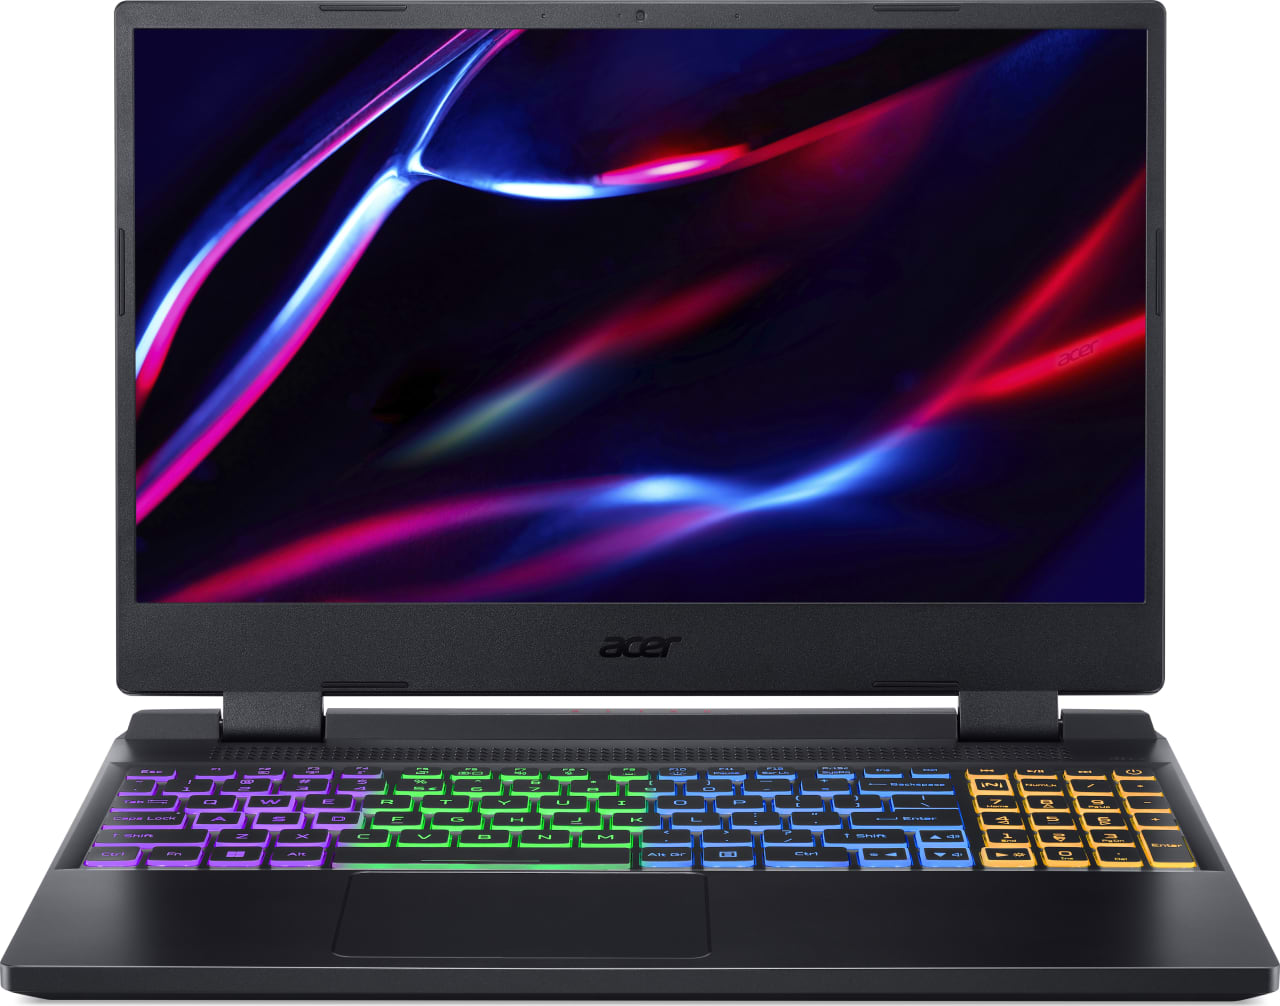 Schwarz Acer Nitro 5 AN515-58-70S9 - Gaming Notebook - Intel® Core™ i7-12700H - 16GB - 1TB SSD - NVIDIA® GeForce® RTX 3060.1